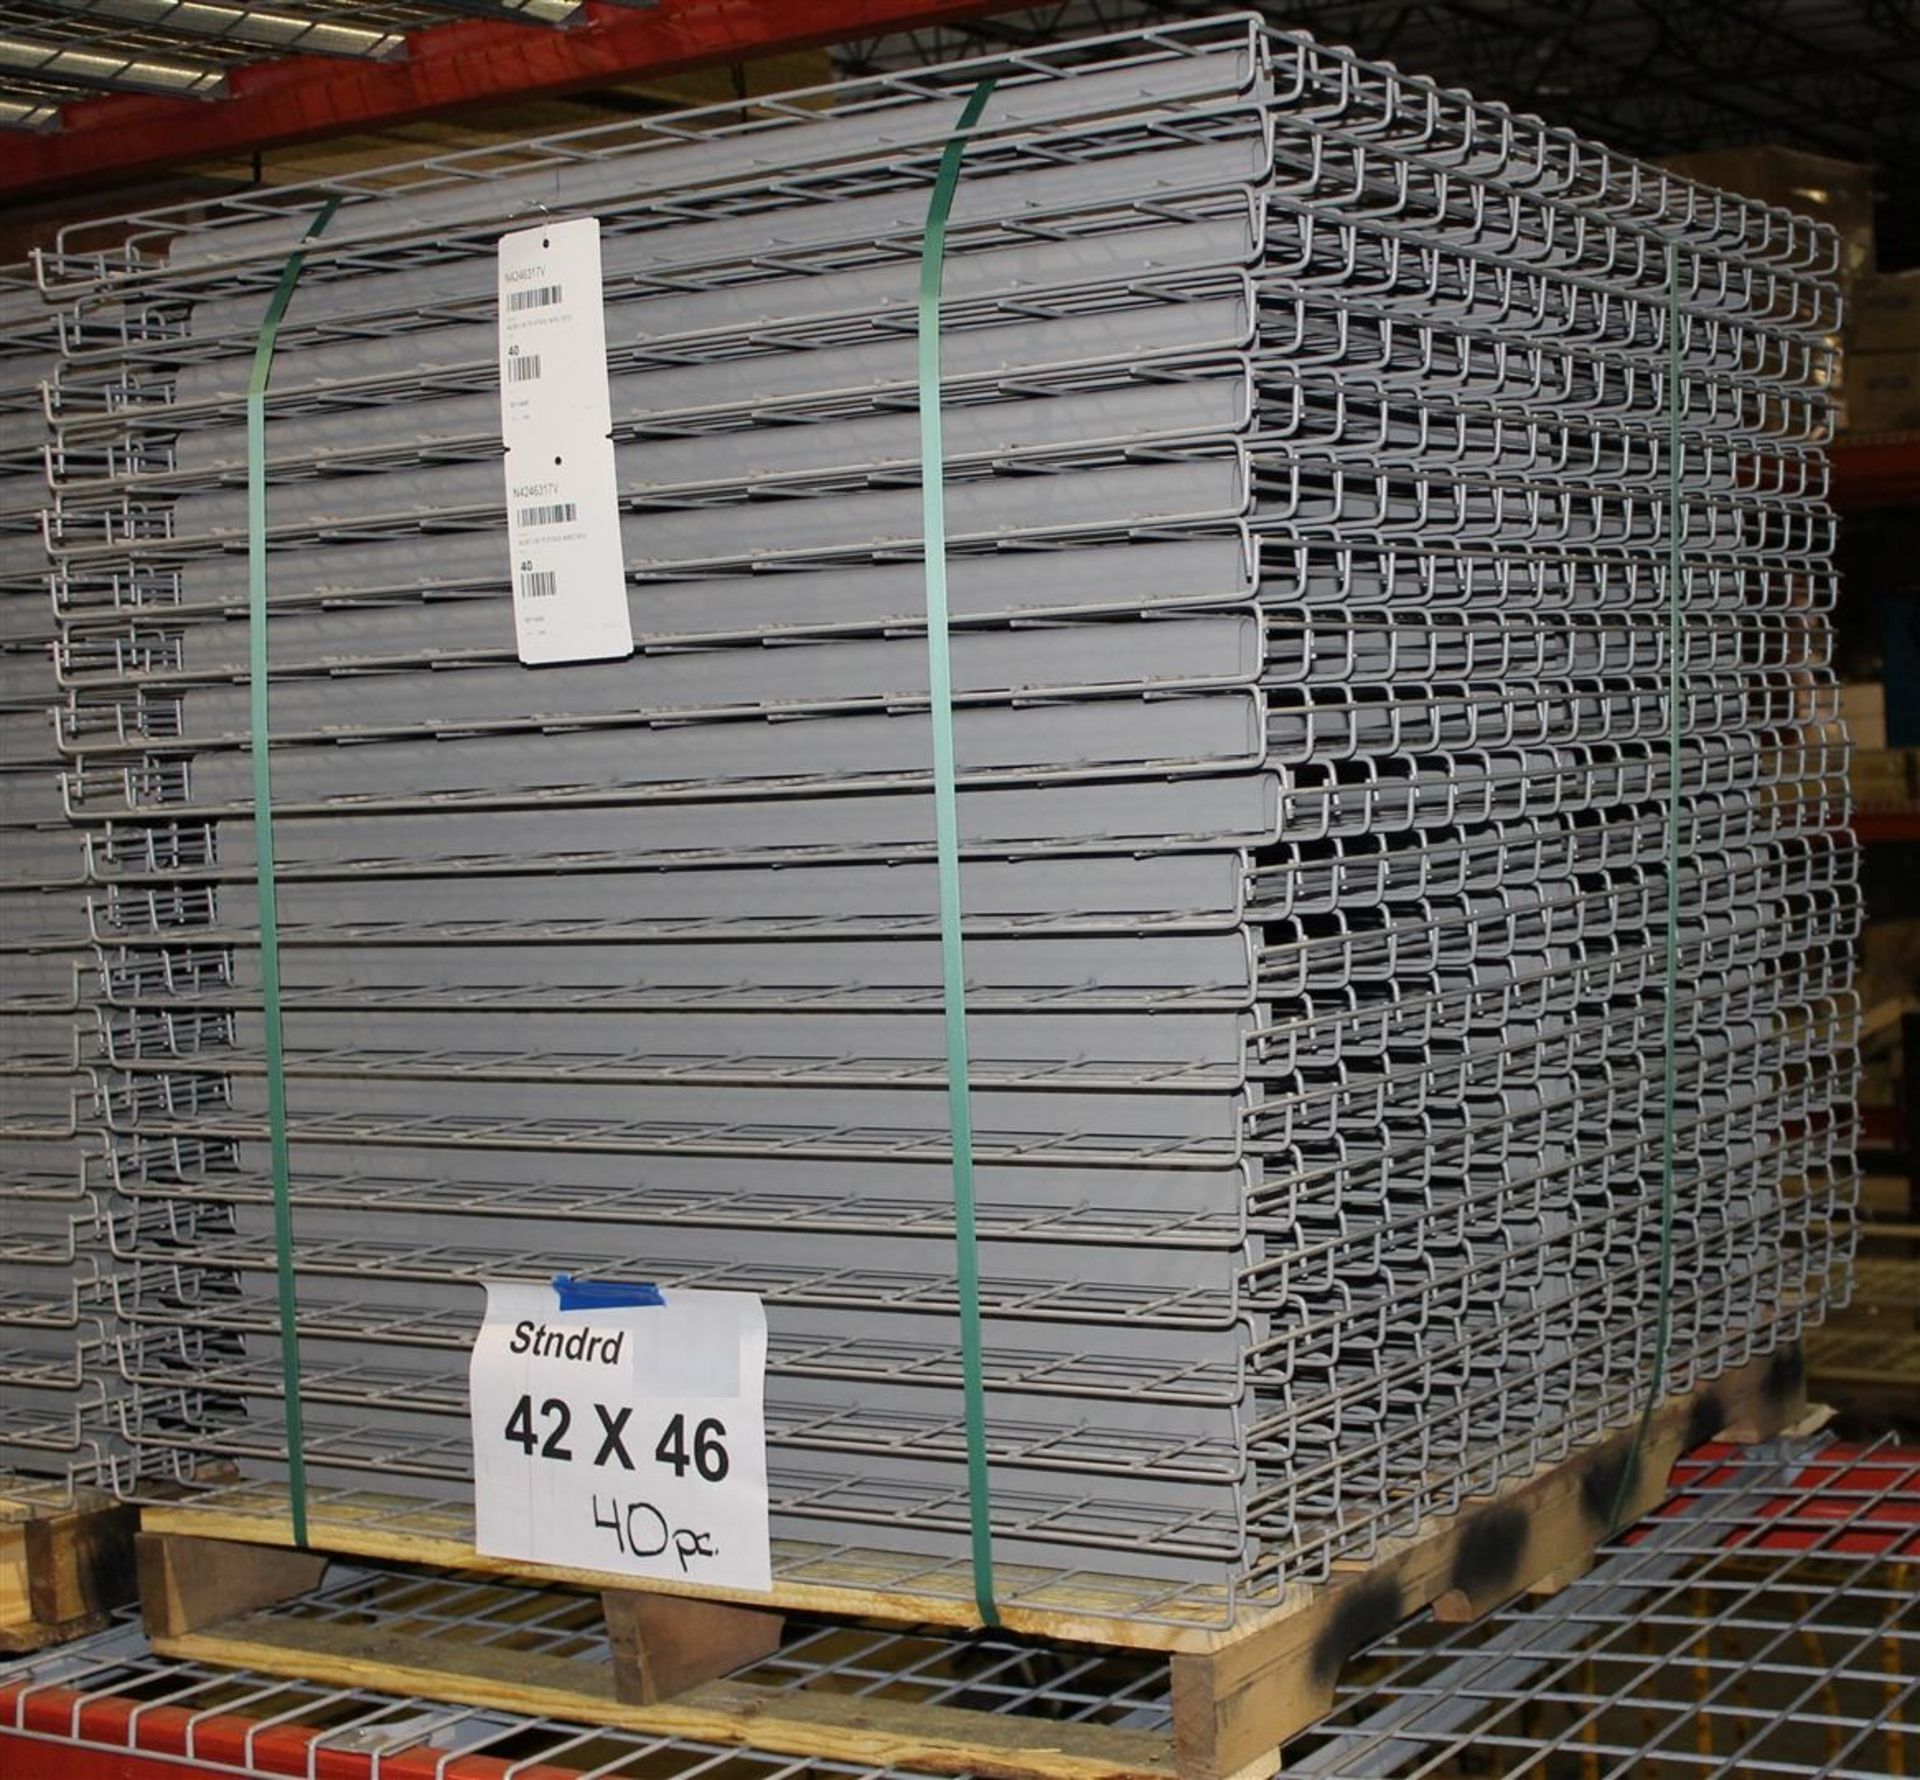 28 BAYS OF TEARDROP STYLE PALLET RACK, LIKE NEW, SIZE: 16'H x 42"D X 8'W - Image 3 of 3